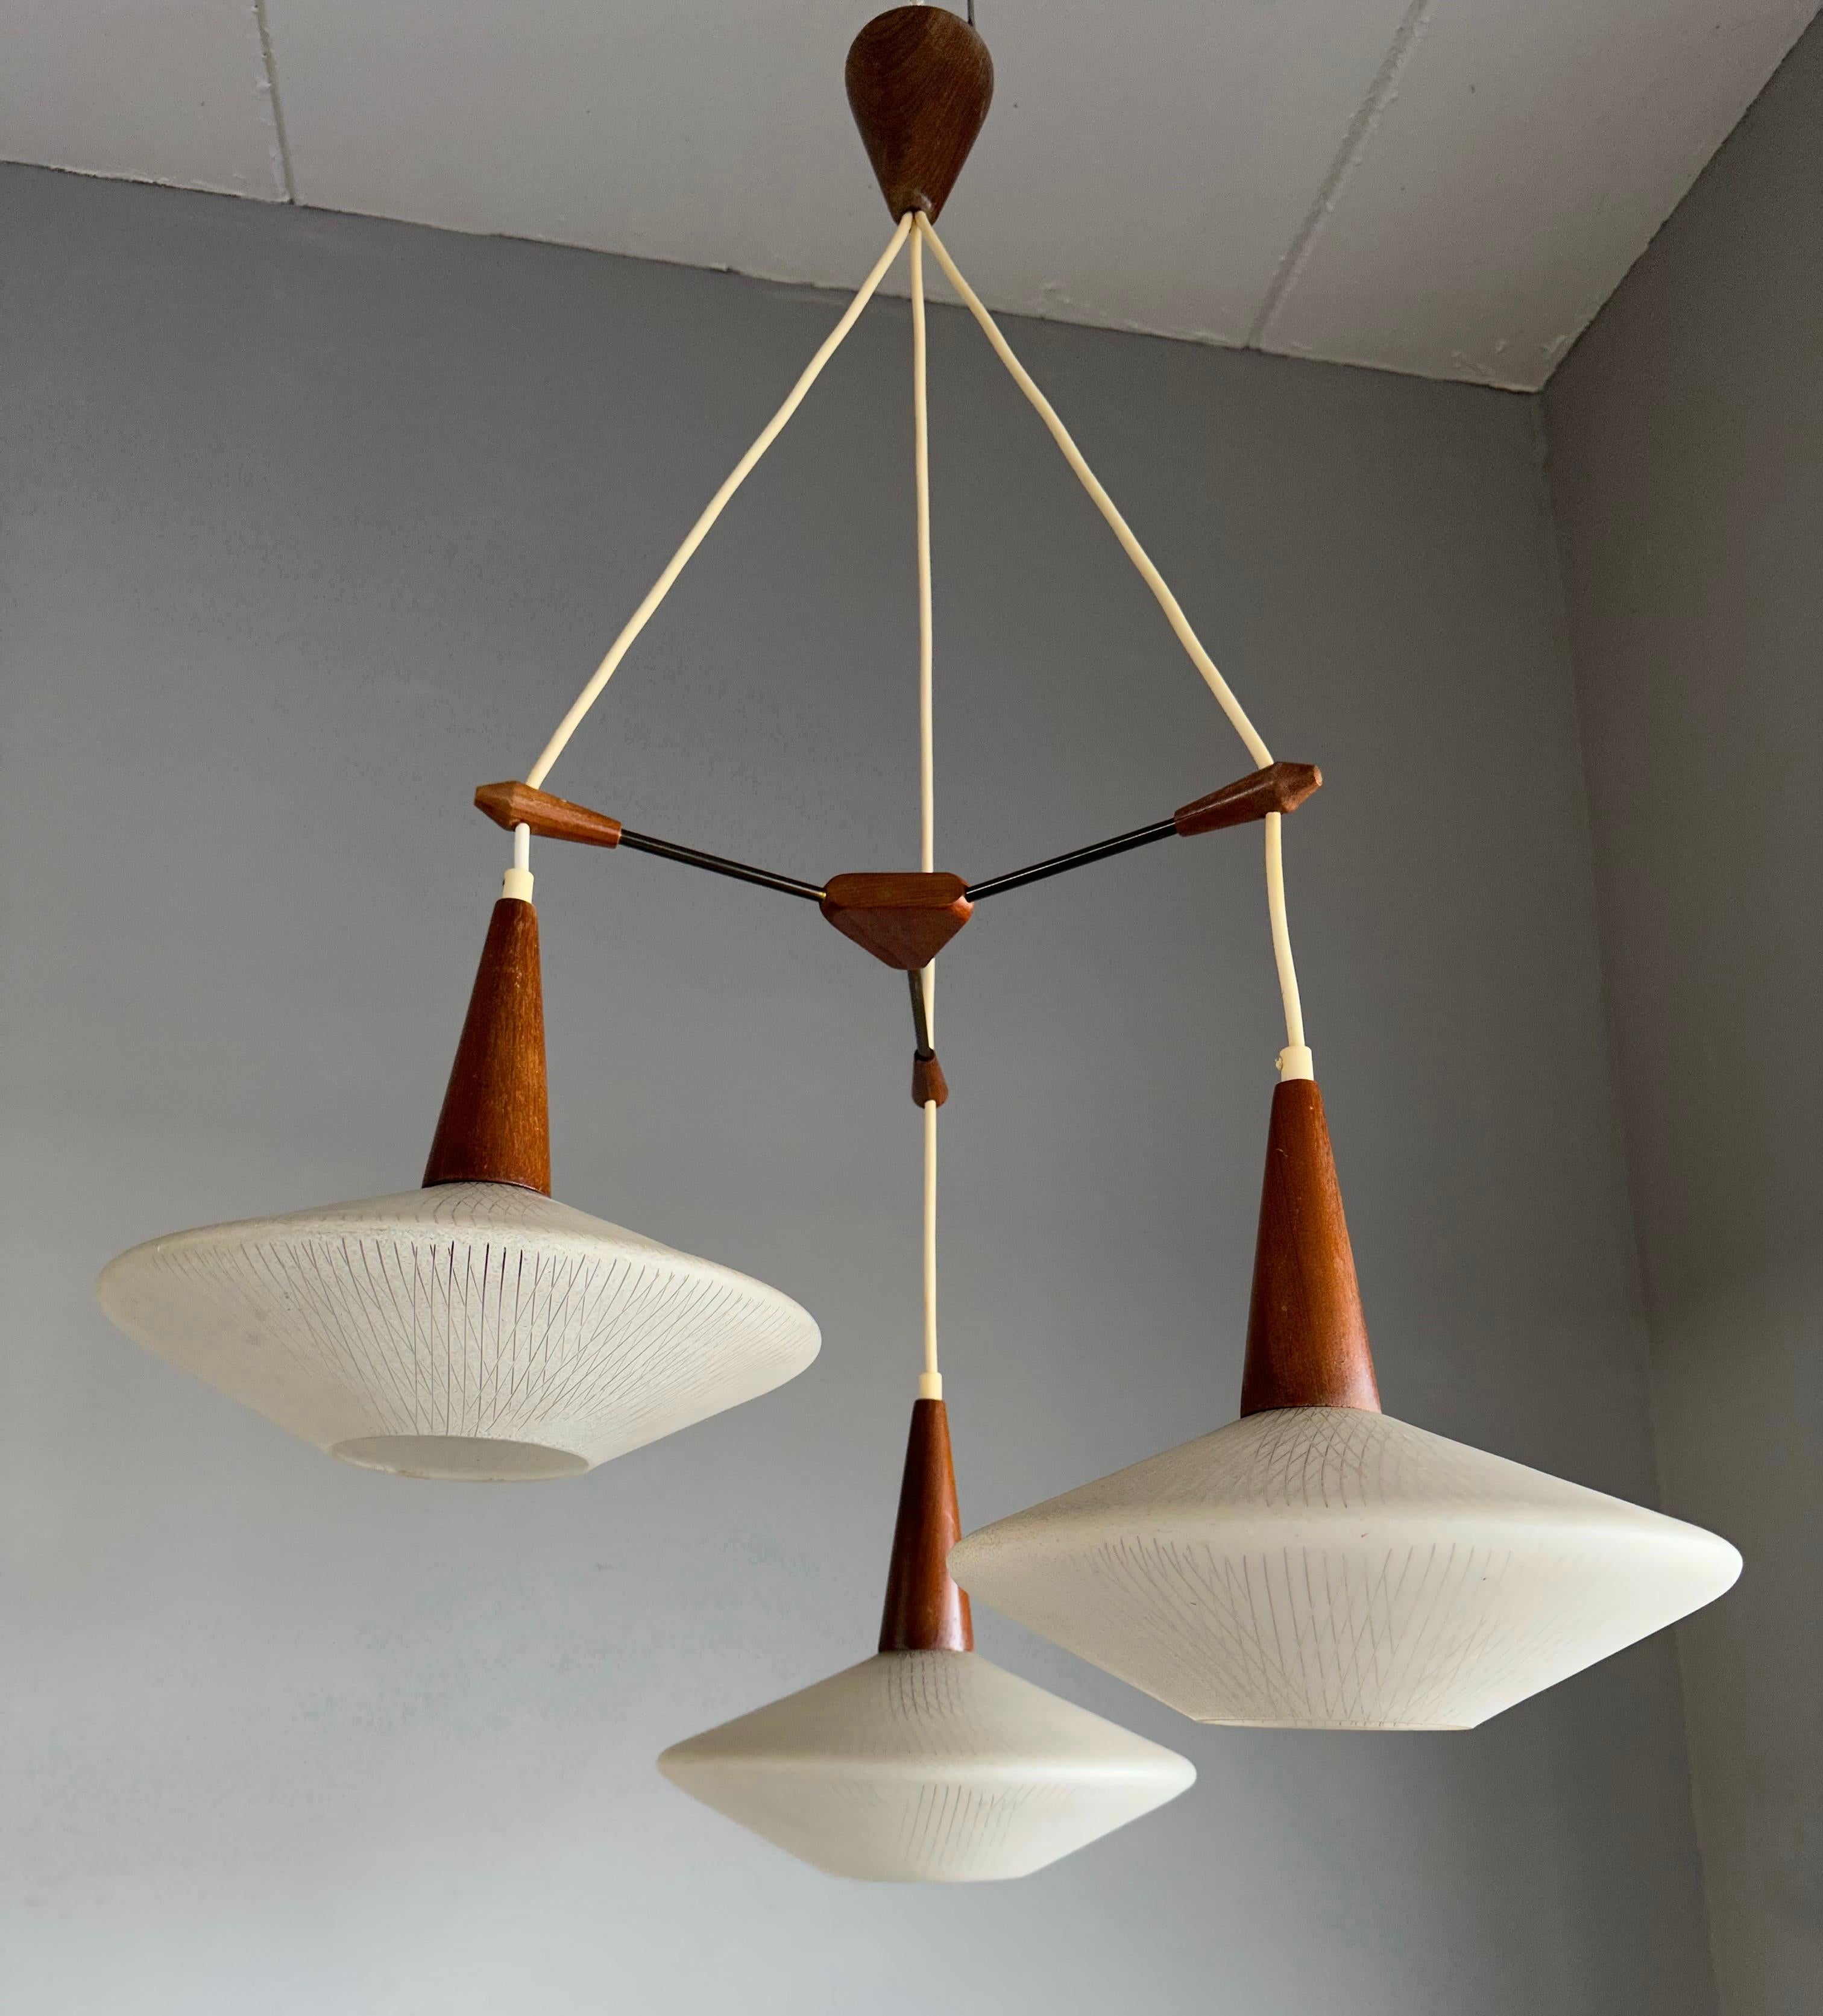 Wonderful Mid-Century Modern ceiling light with teakwood and art glass shades.

This vintage light fixture has a beautiful look and feel and you will hardly ever find a light fixture from the Mid-Century Modern era with more stylish or artistic